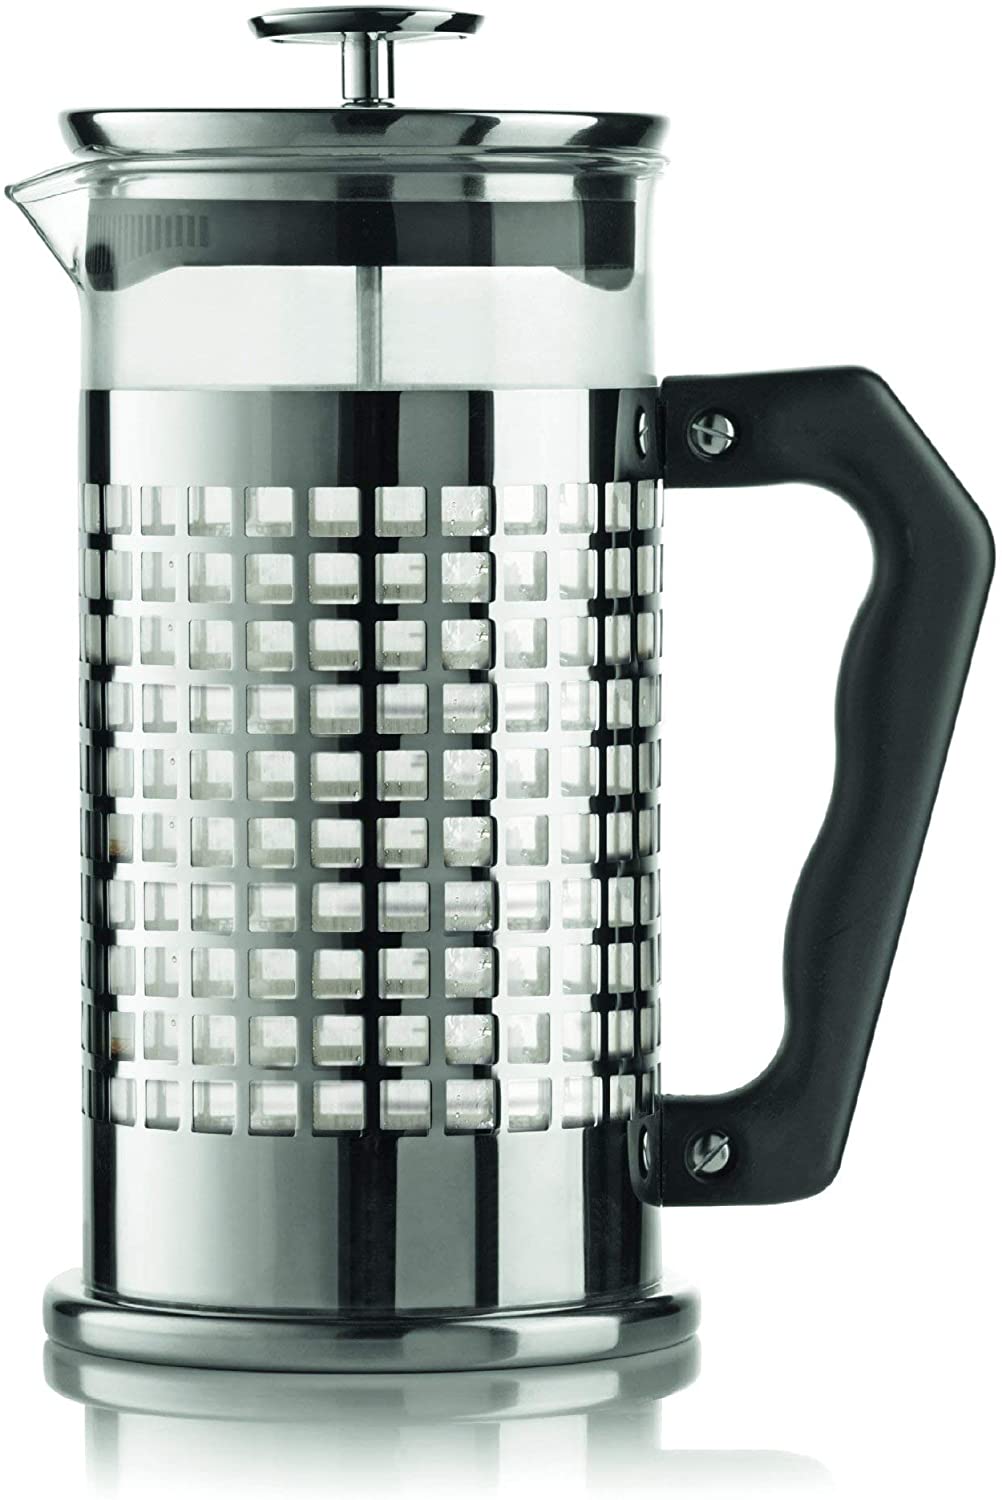 Bialetti 1 Litre 8 Cup Bialetti Trend Cafetiere, Silver